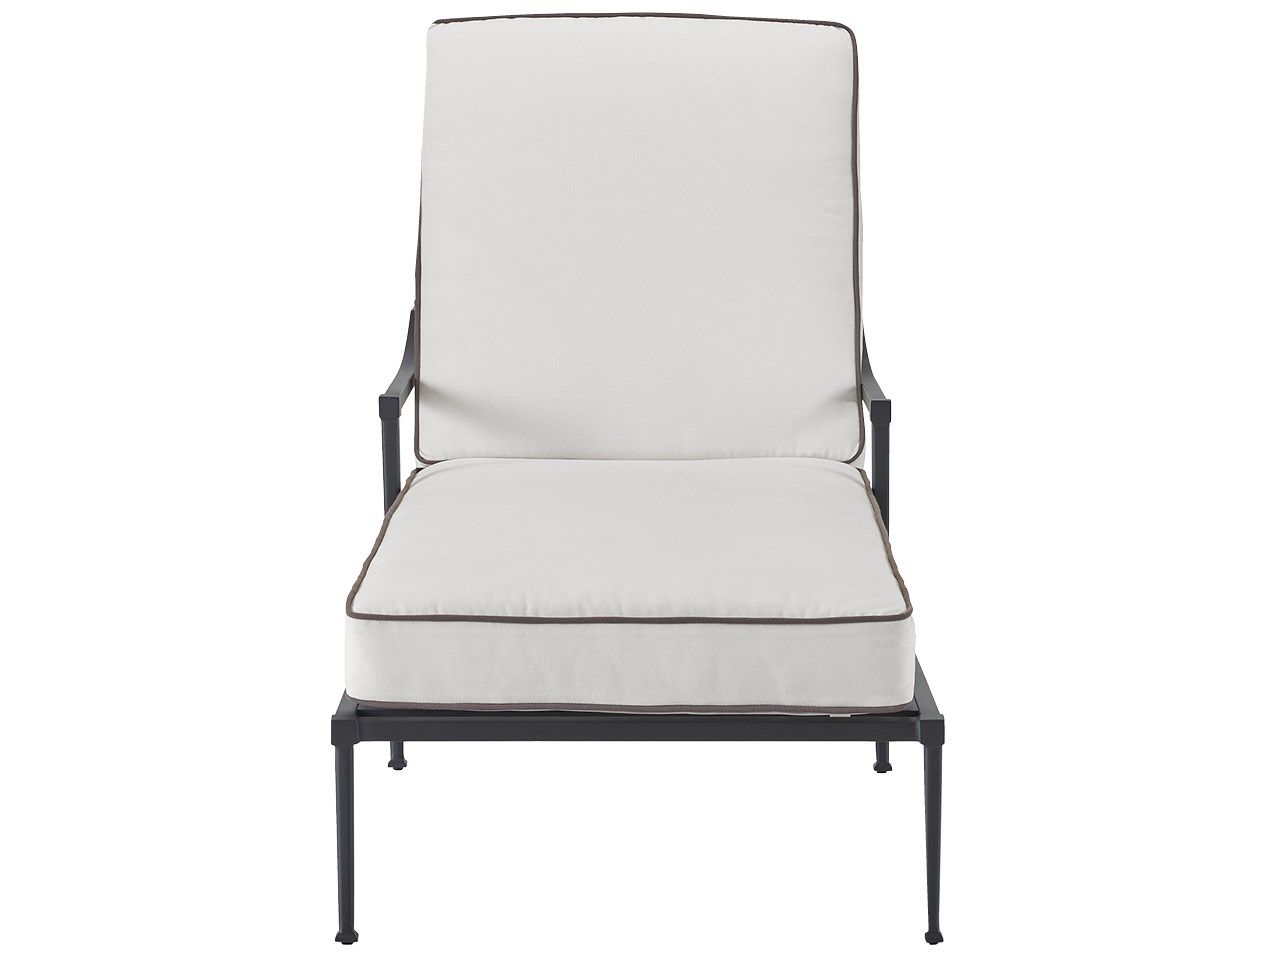 Seneca - Chaise Lounge - Special Order - White